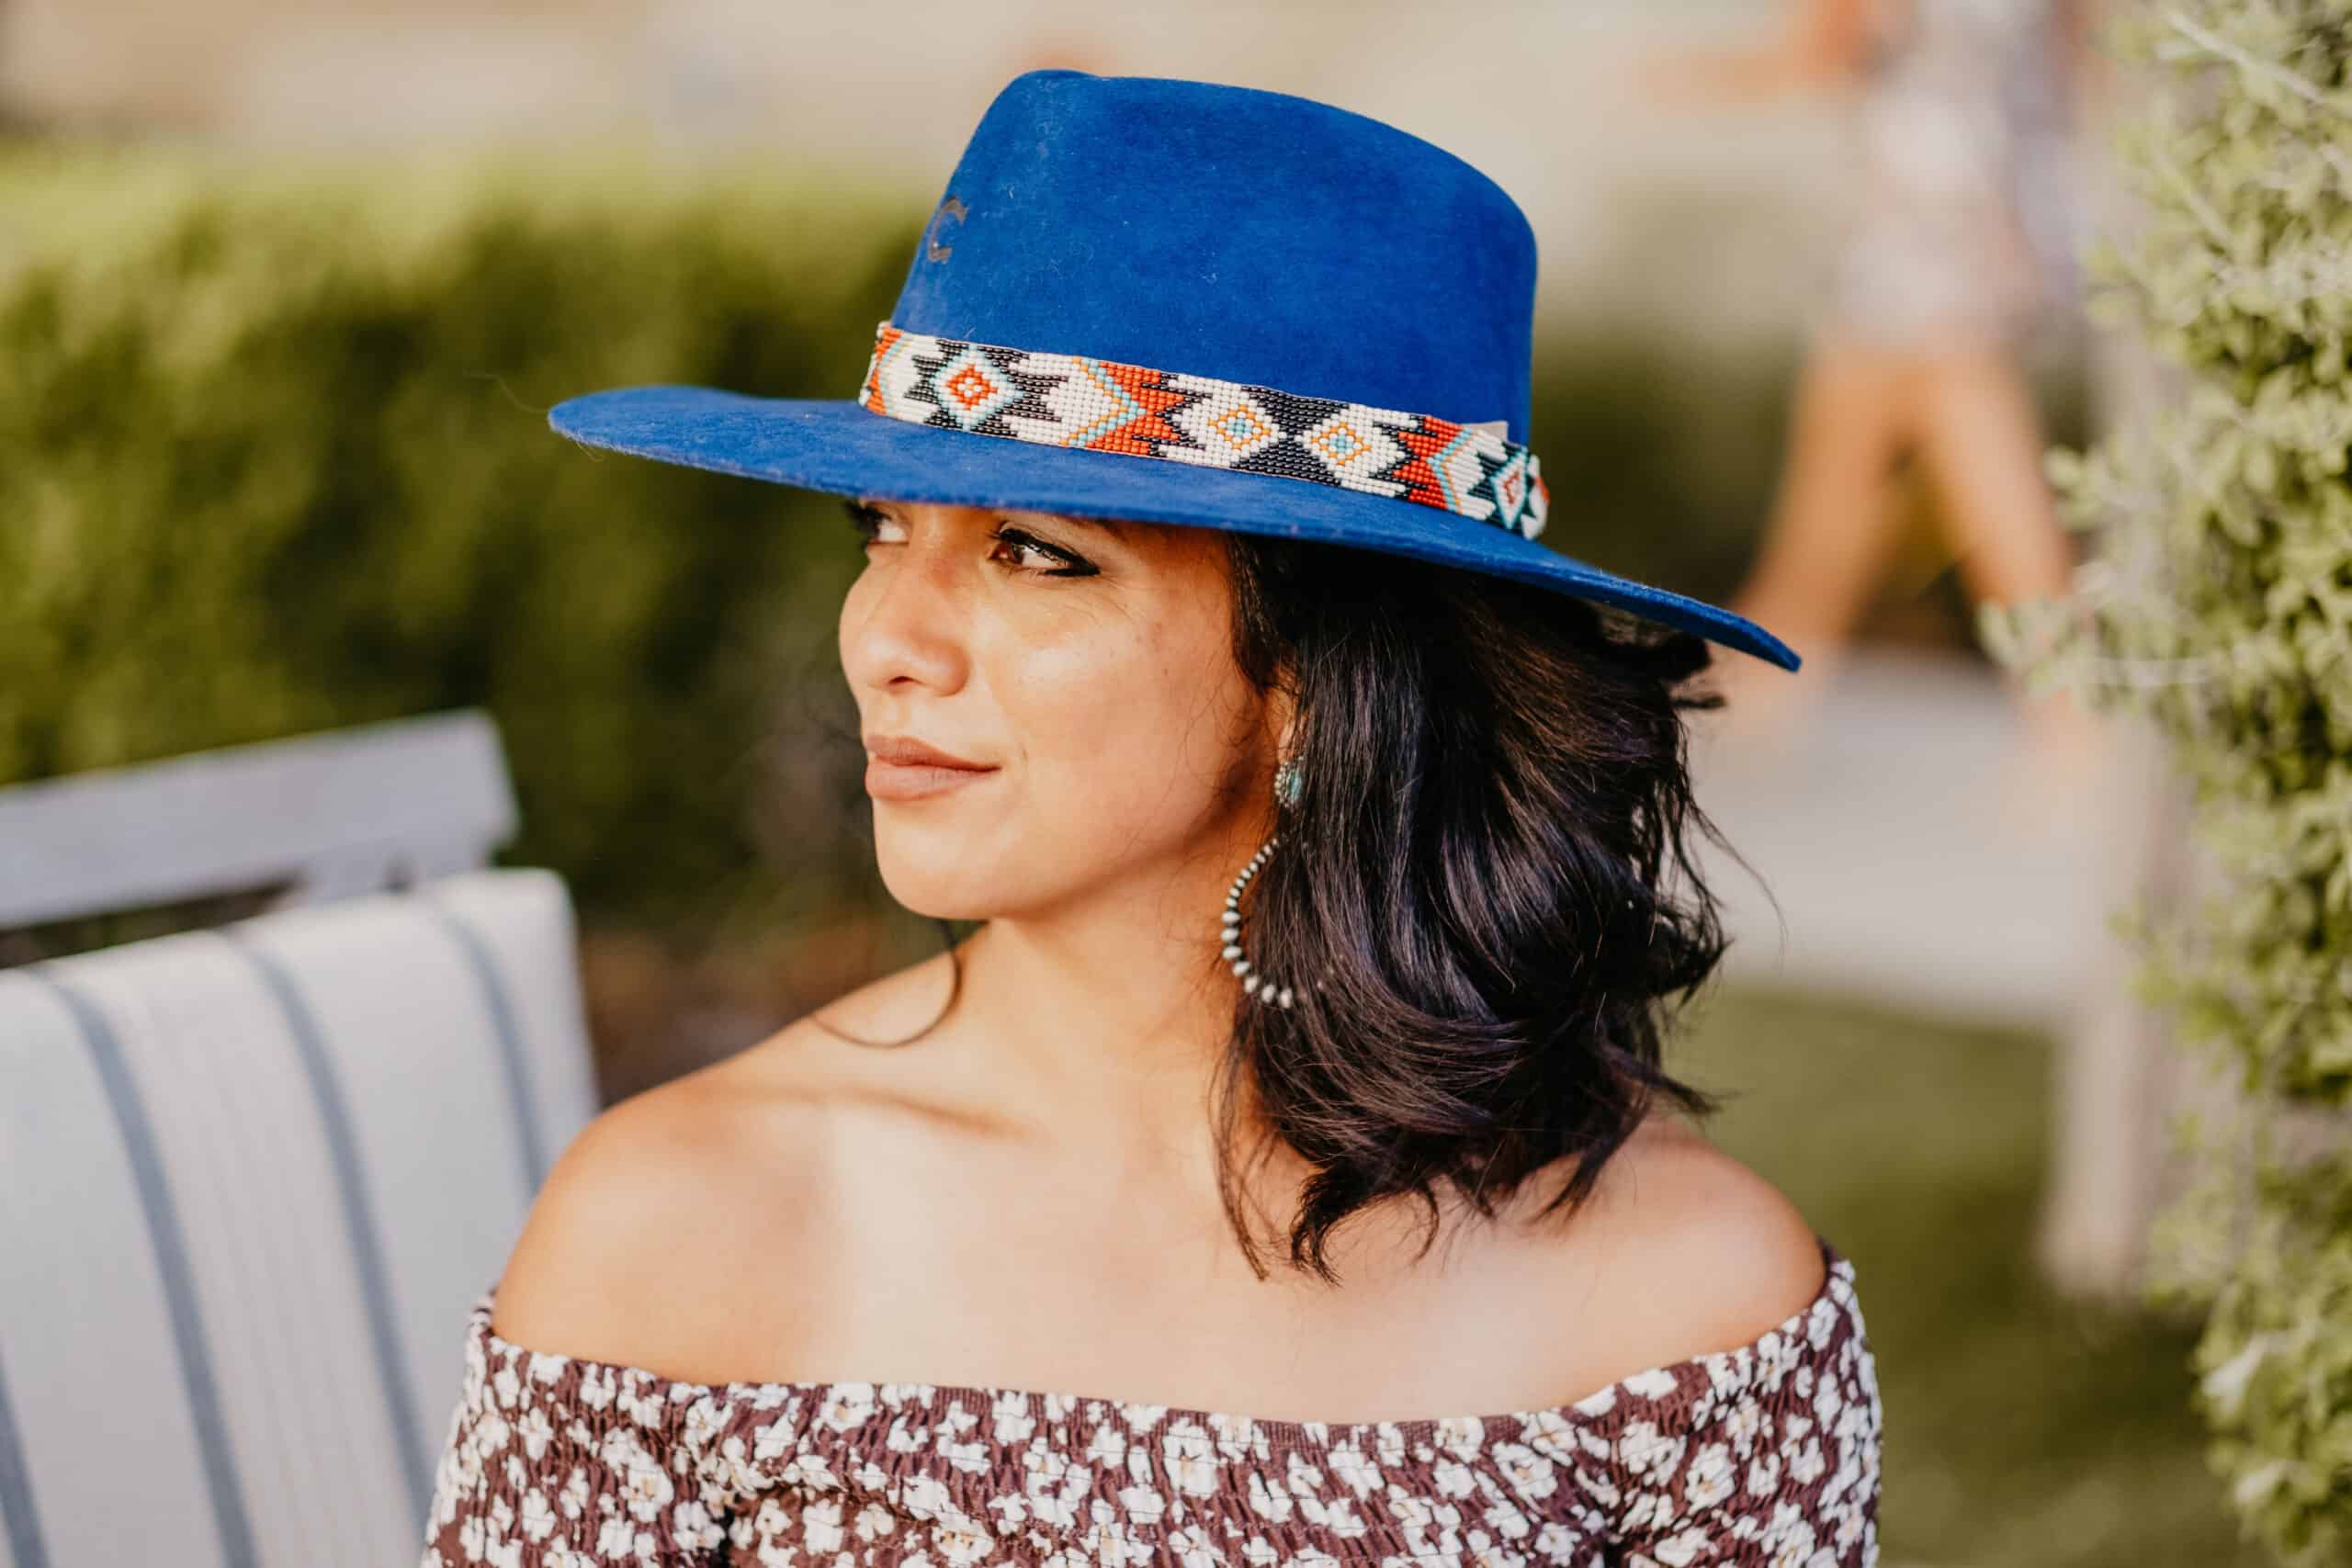 Susie Maldonado wearing a blue hat and floral top is an upcoming guest.